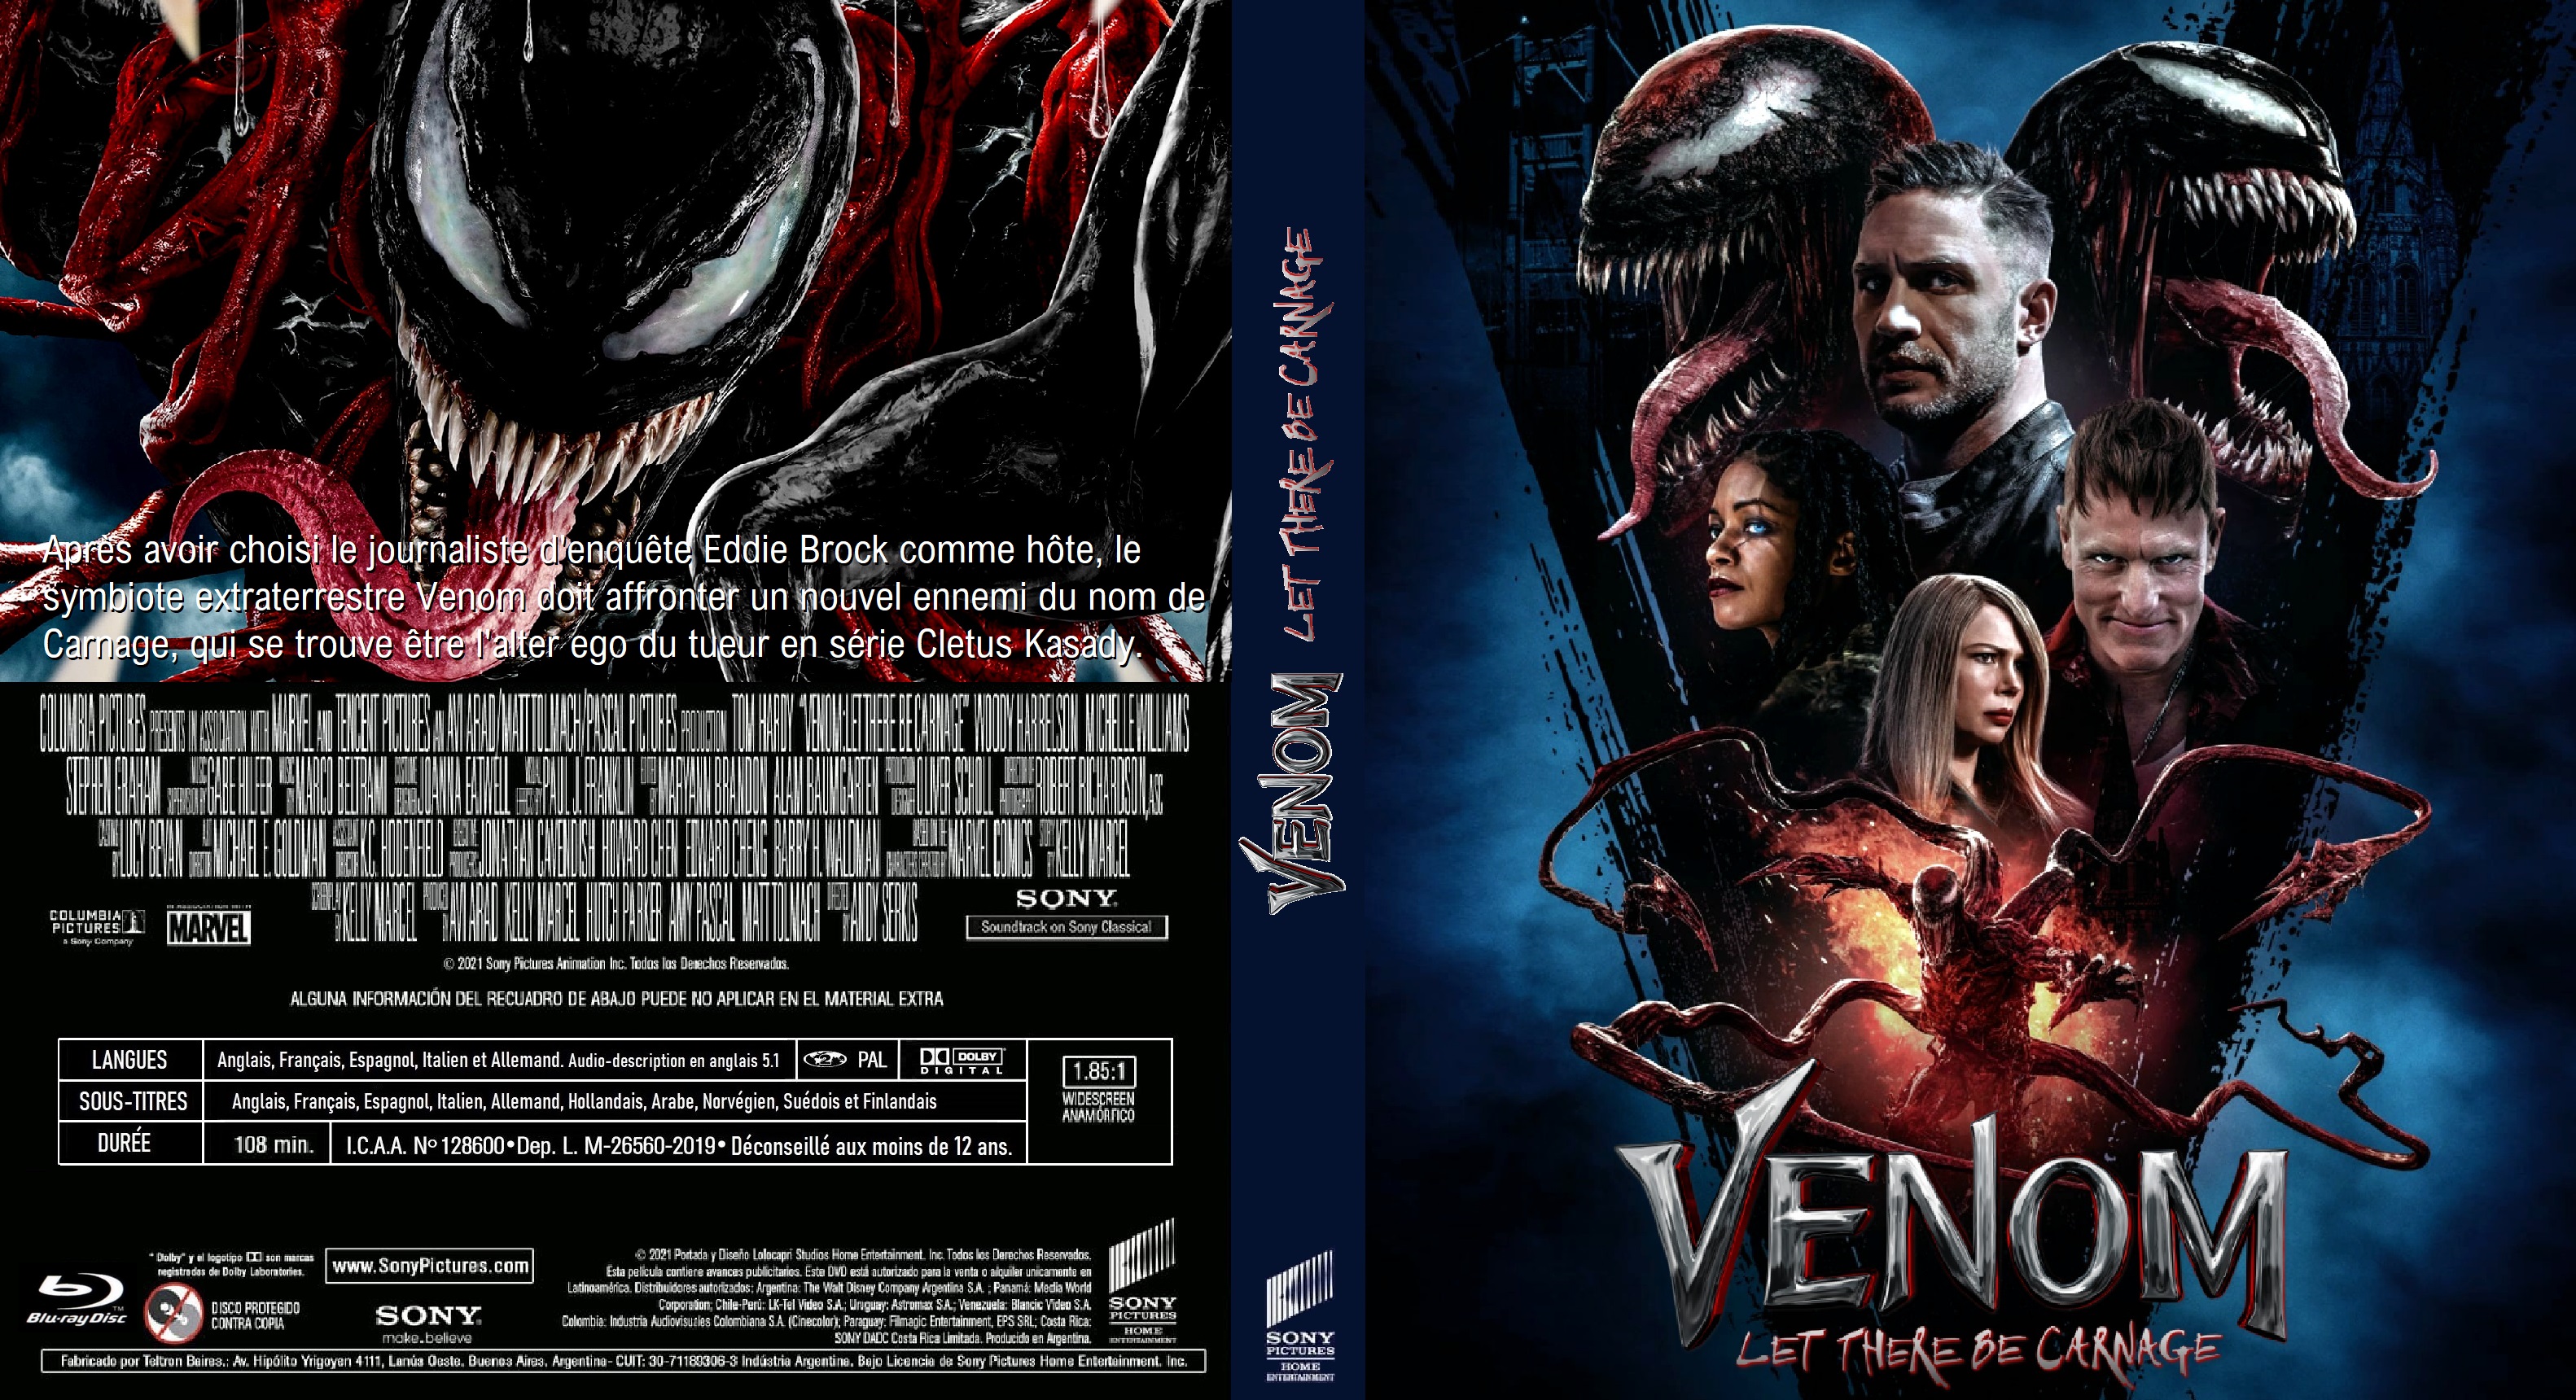 Jaquette DVD Venom: Let There Be Carnage custom (BLU-RAY)